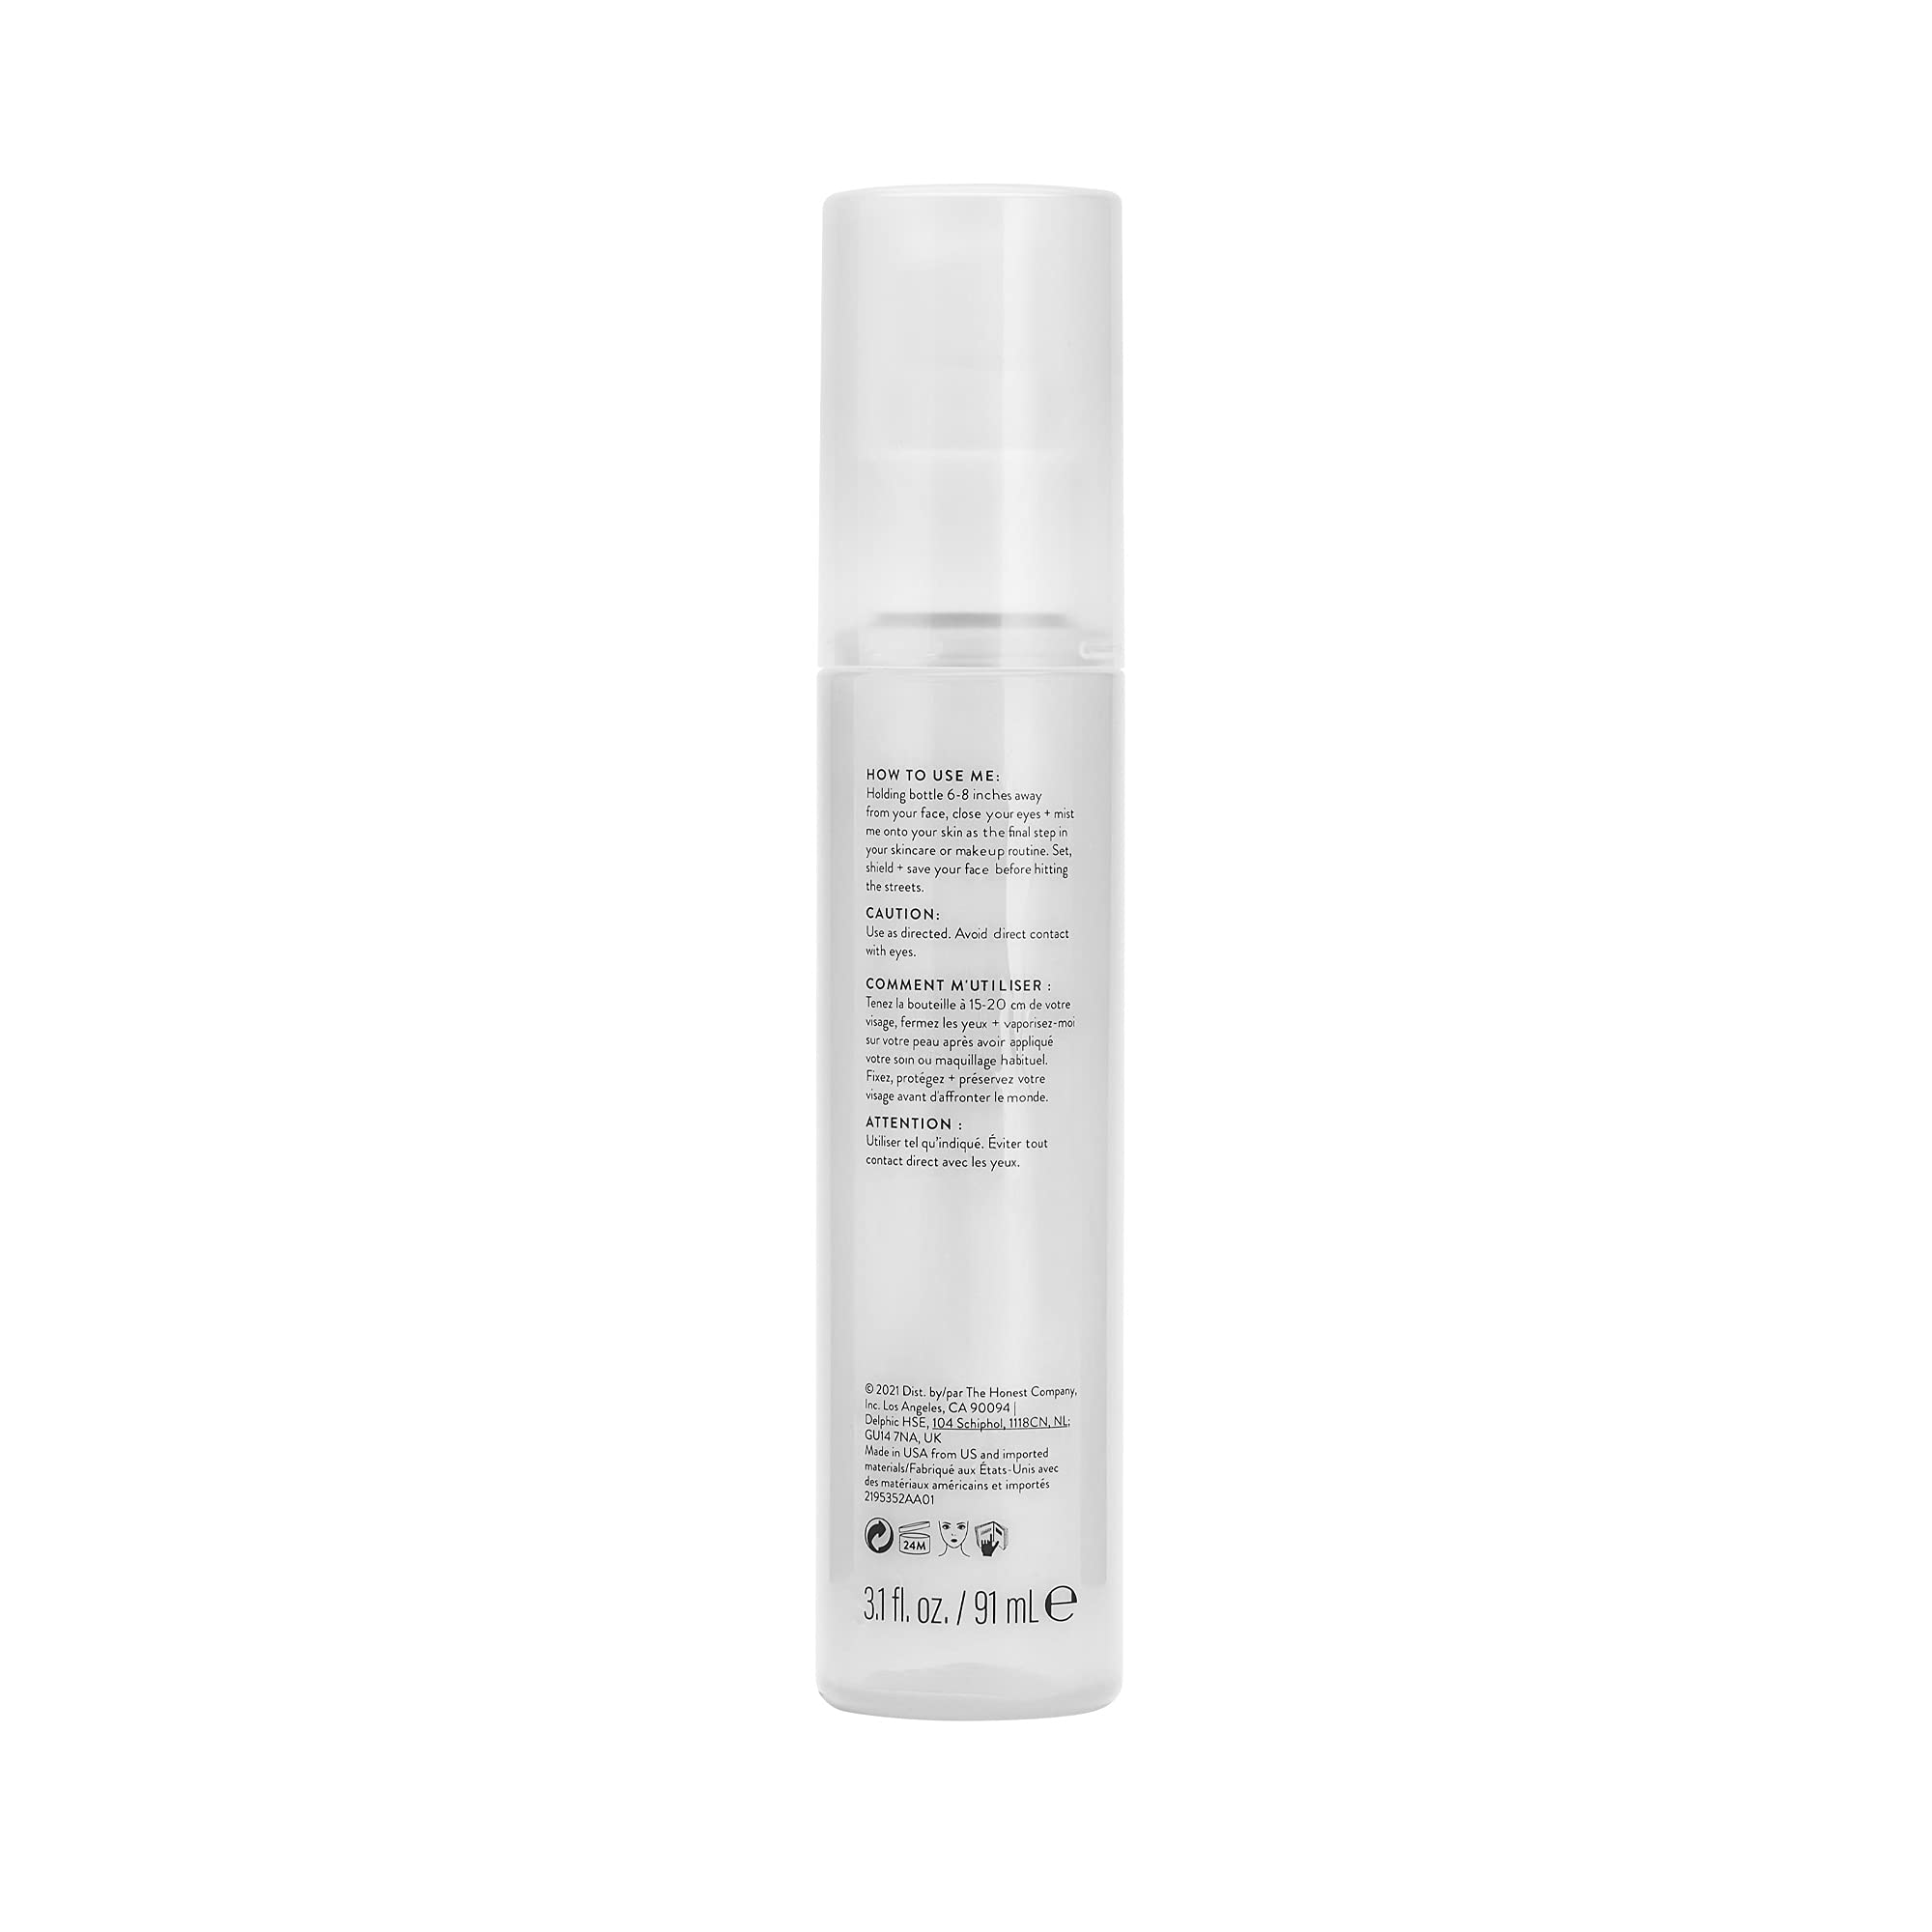 Honest Beauty Save Face Shielding Setting Spray with Extremolyte | Defend against UV and blue light | Oil free + EWG Certified + Vegan + Cruelty free | 3.1 fl. oz.